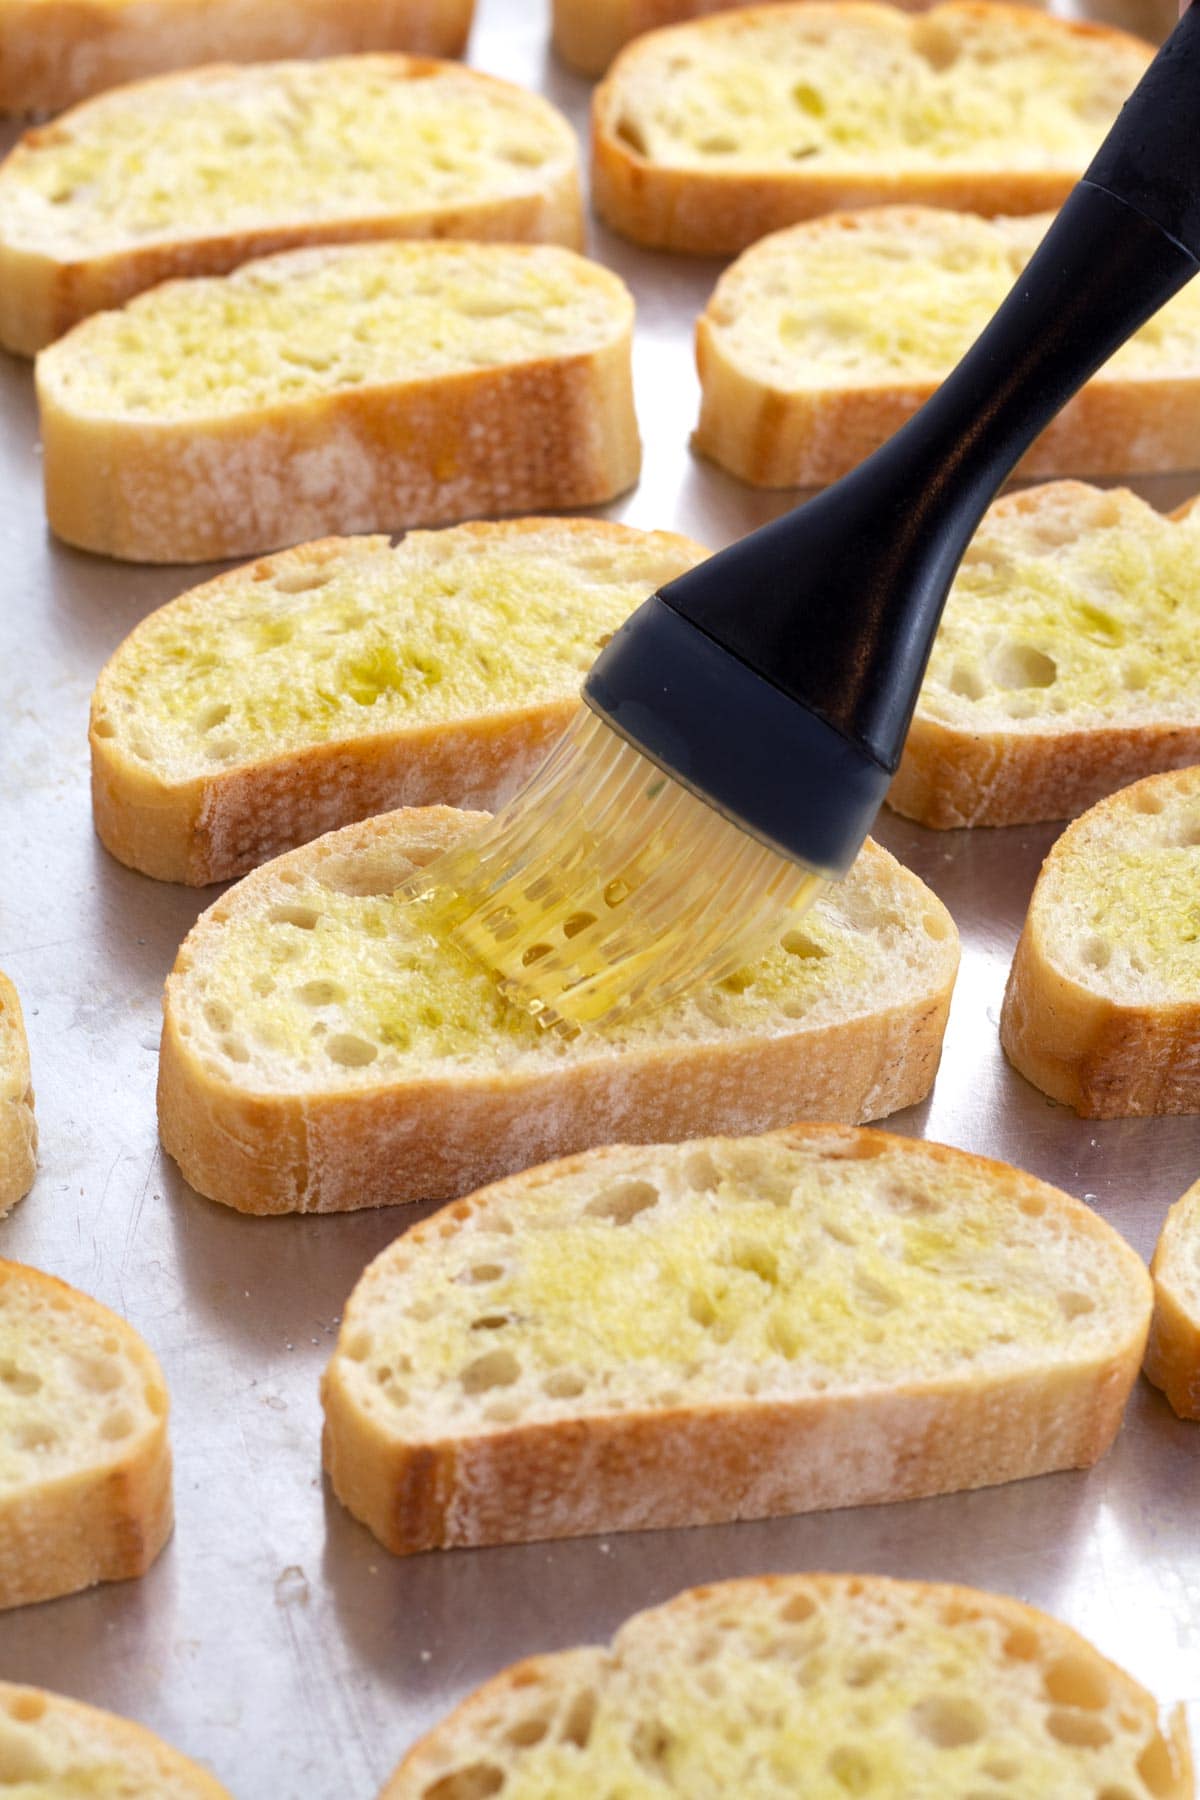 Silicone brush coating bread slices with olive oil on a silver sheet pan.